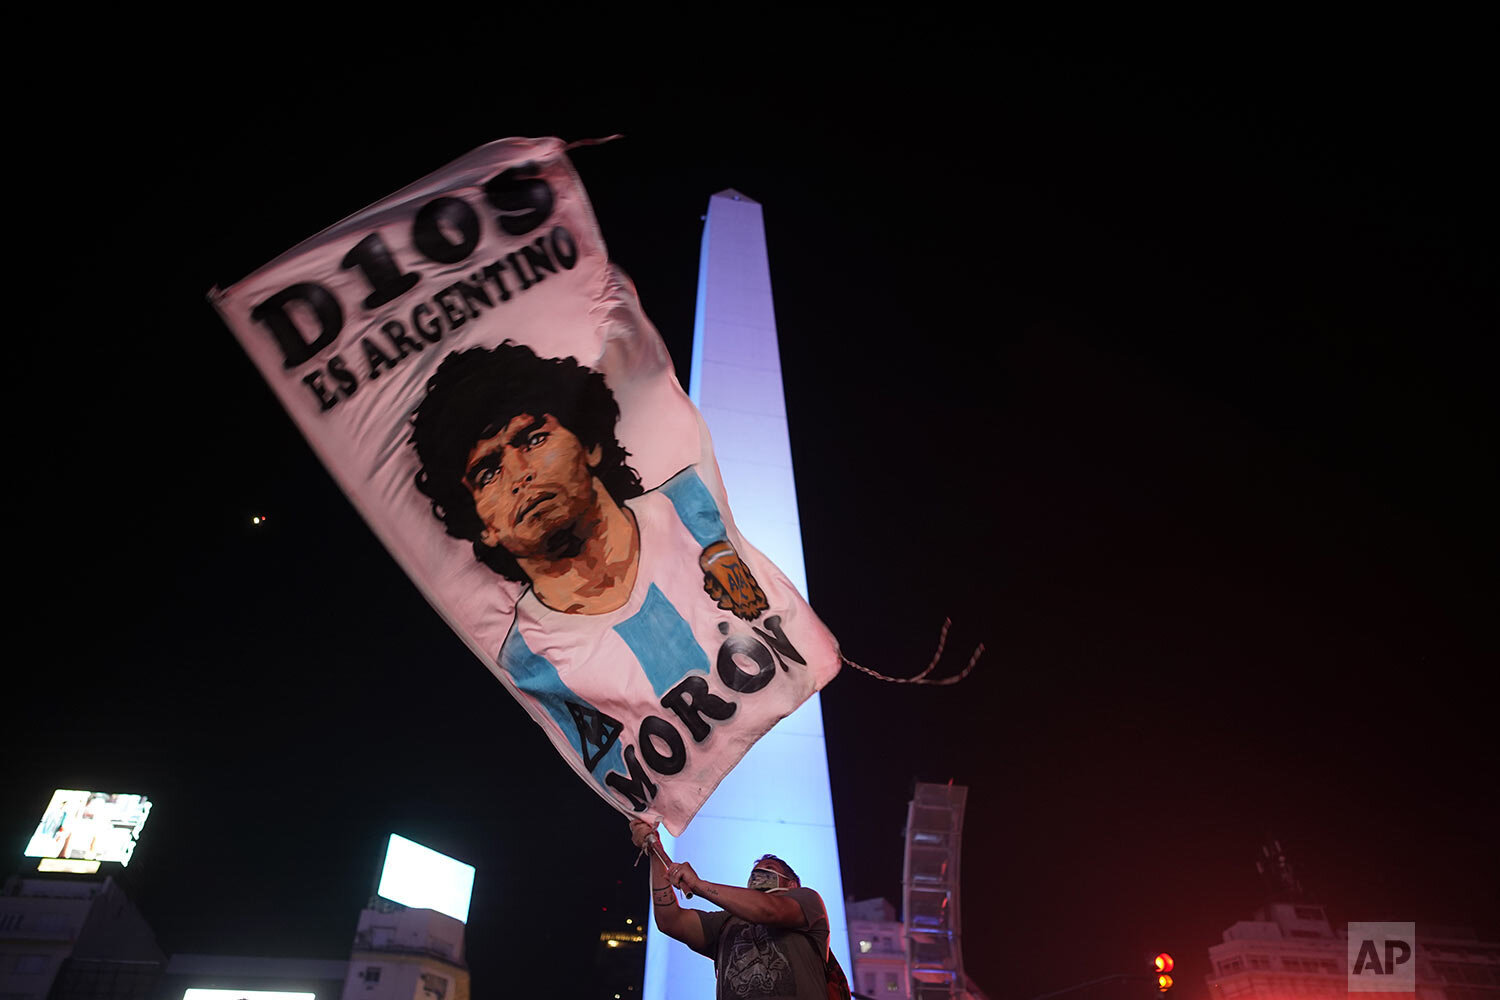  A man waves a banner with the image of Diego Maradona who died from a heart attack at his home at the age of 60, in downtown Buenos Aires, Argentina, Wednesday, Nov. 25, 2020. (AP Photo/Victor Caivano) 